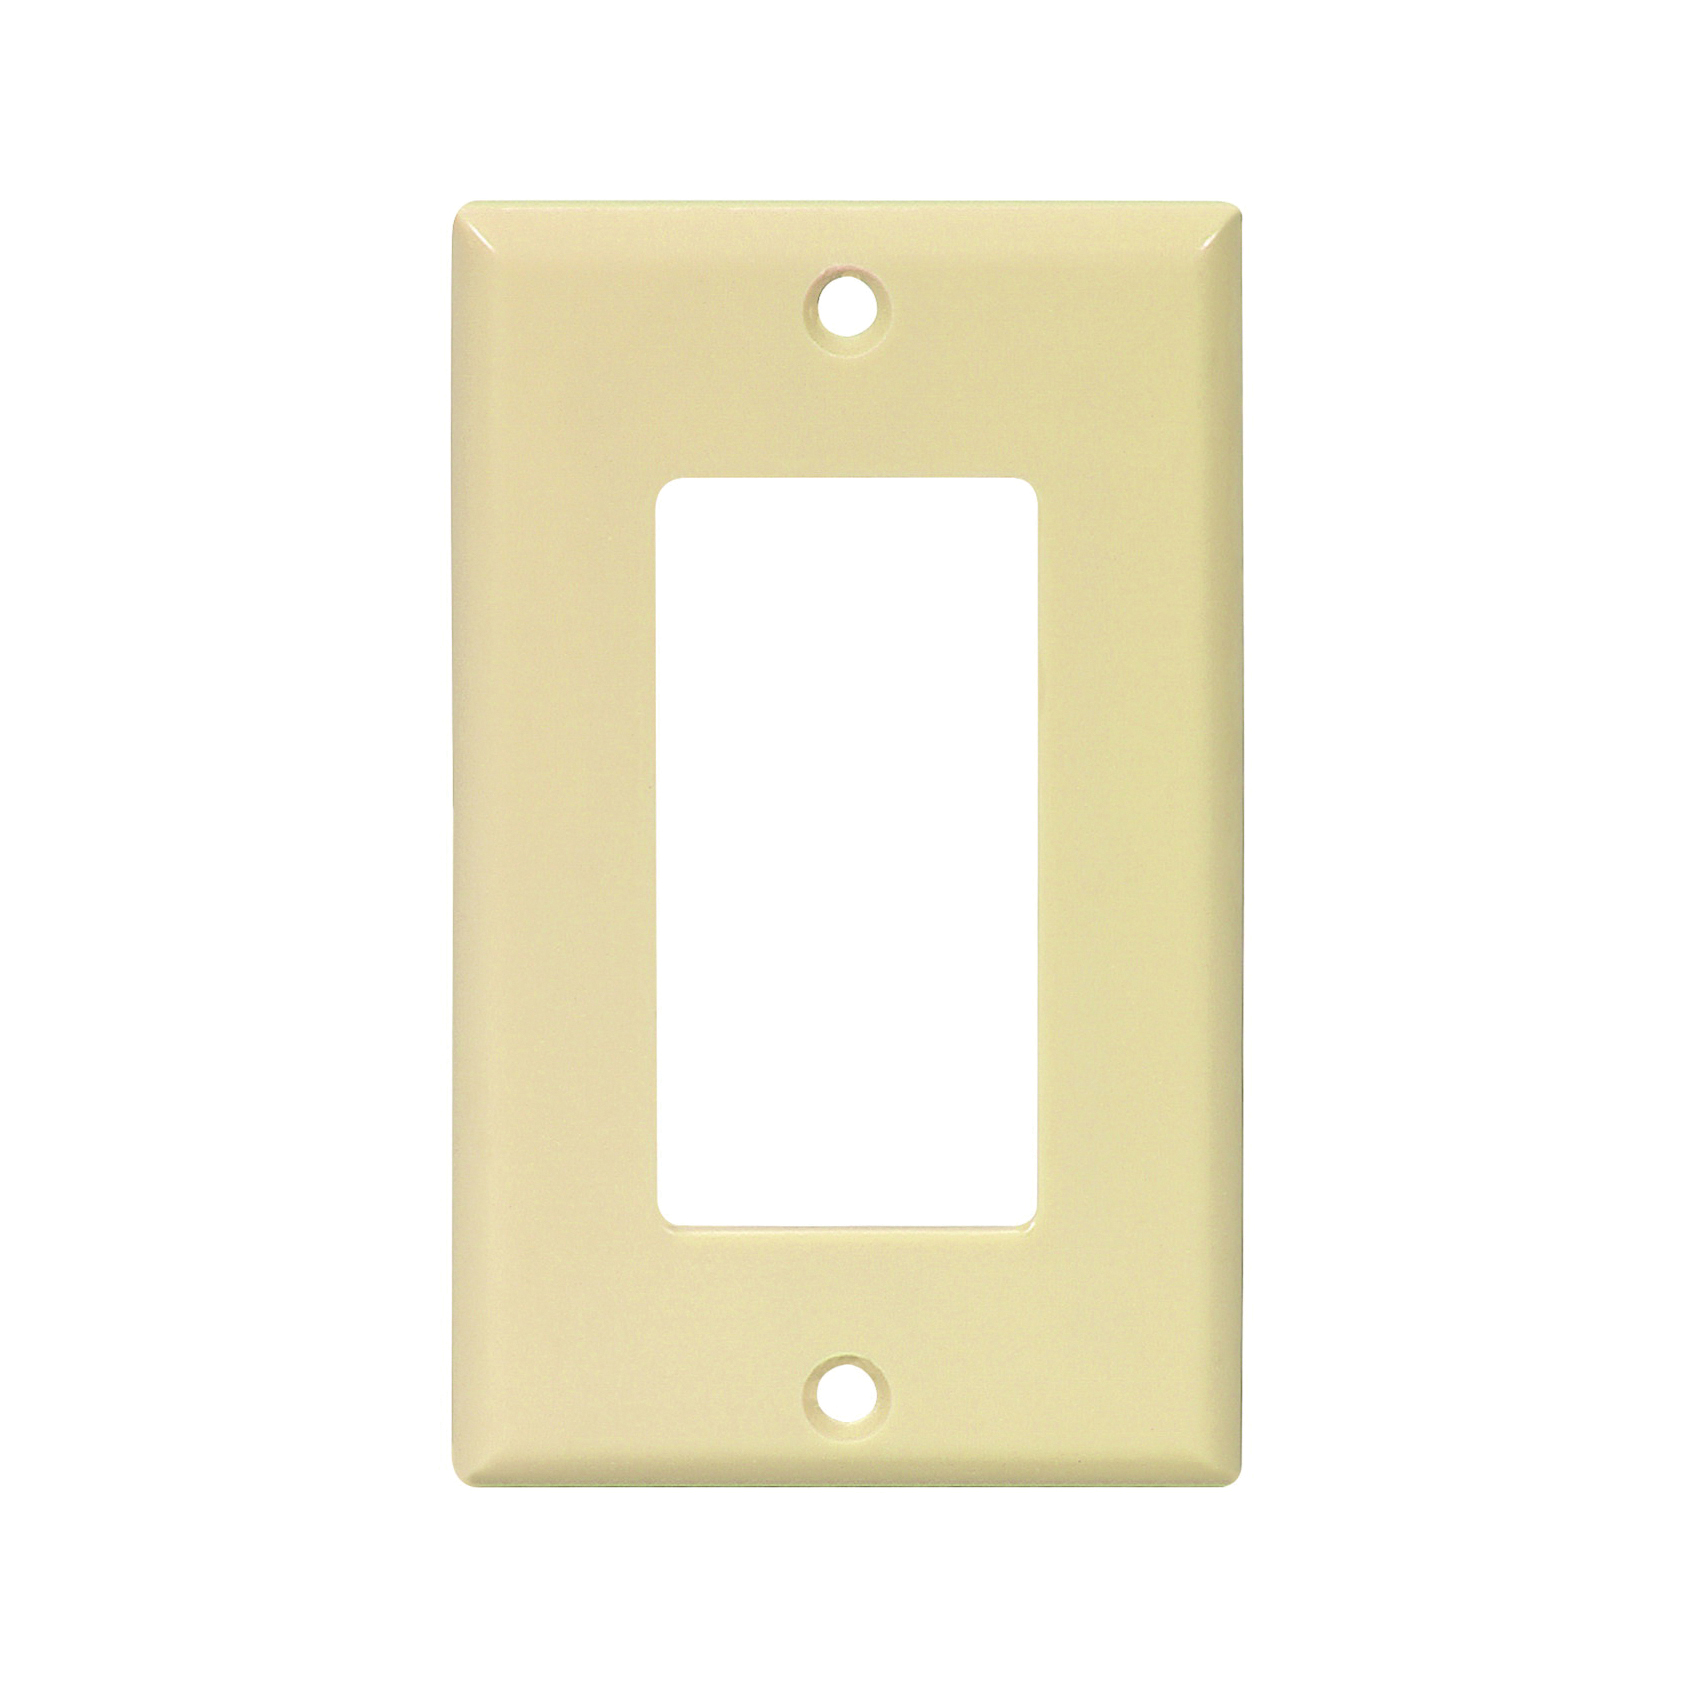 Eaton 2151V-BOX Wallplate, 4-1/2 in L, 2-3/4 in W, 1-Gang, Thermoset, Ivory, High-Gloss